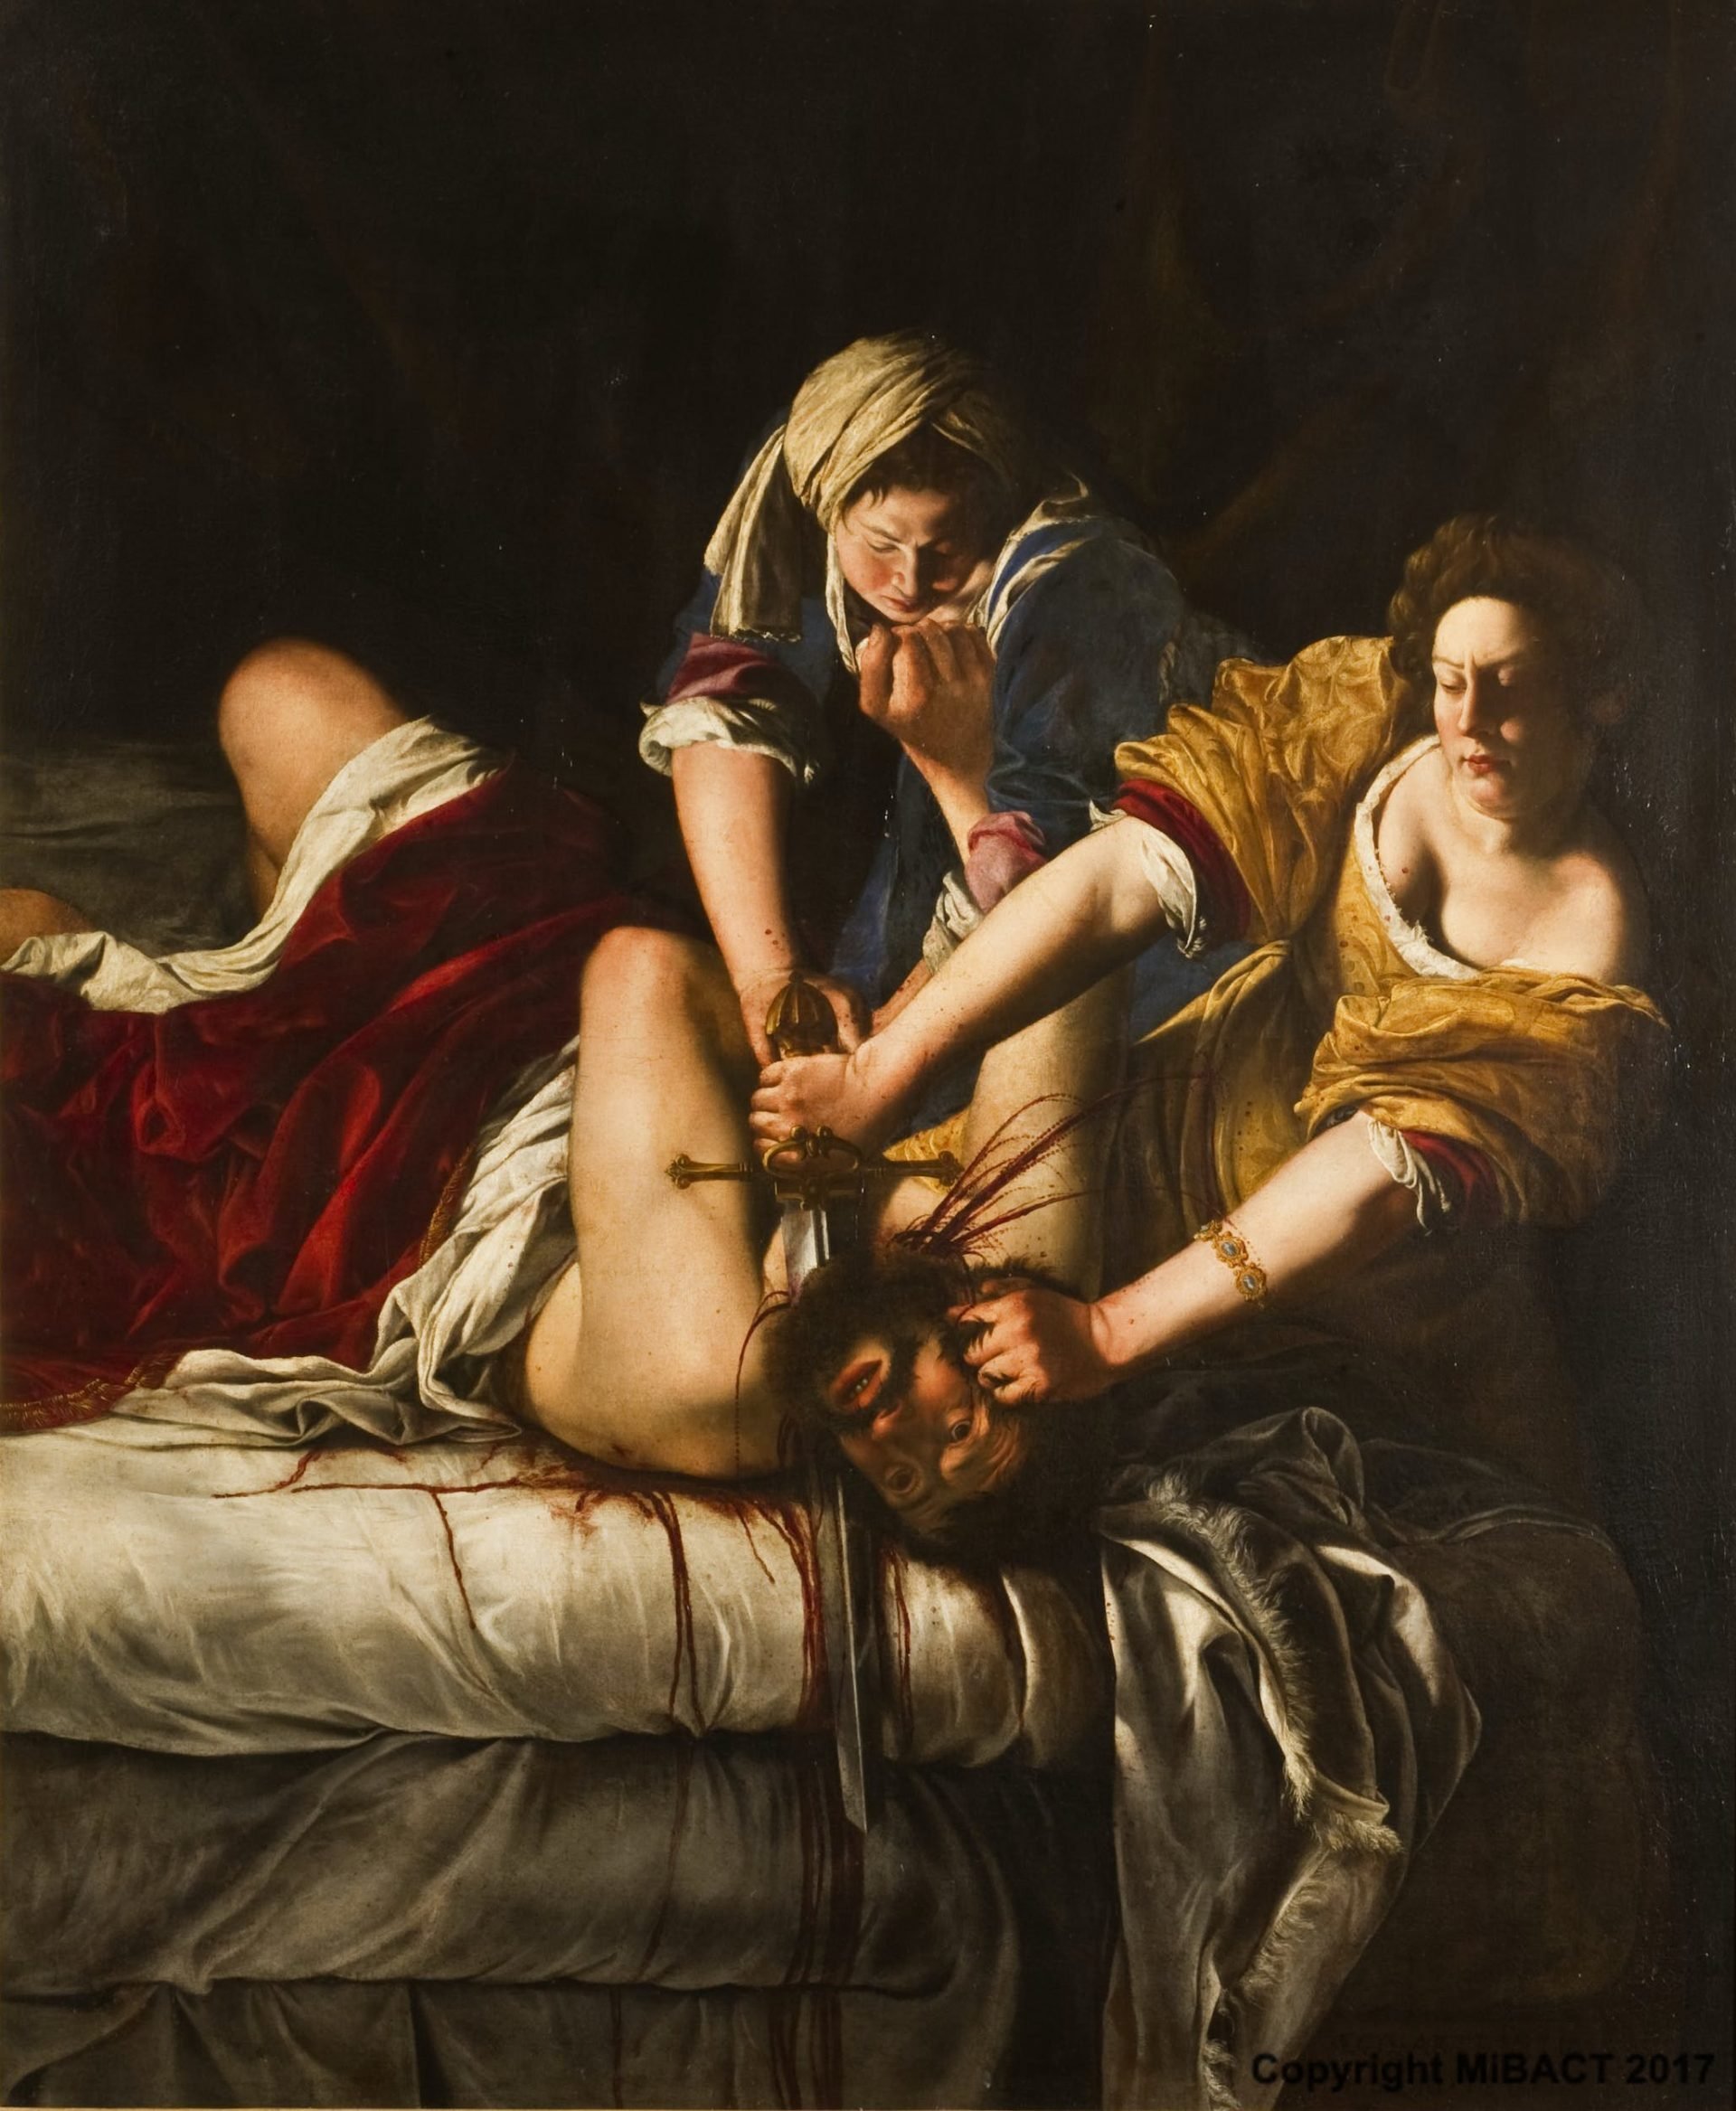 Artemisia Gentileschi portrays the moment when Holofernes is being decapitated by Judith.